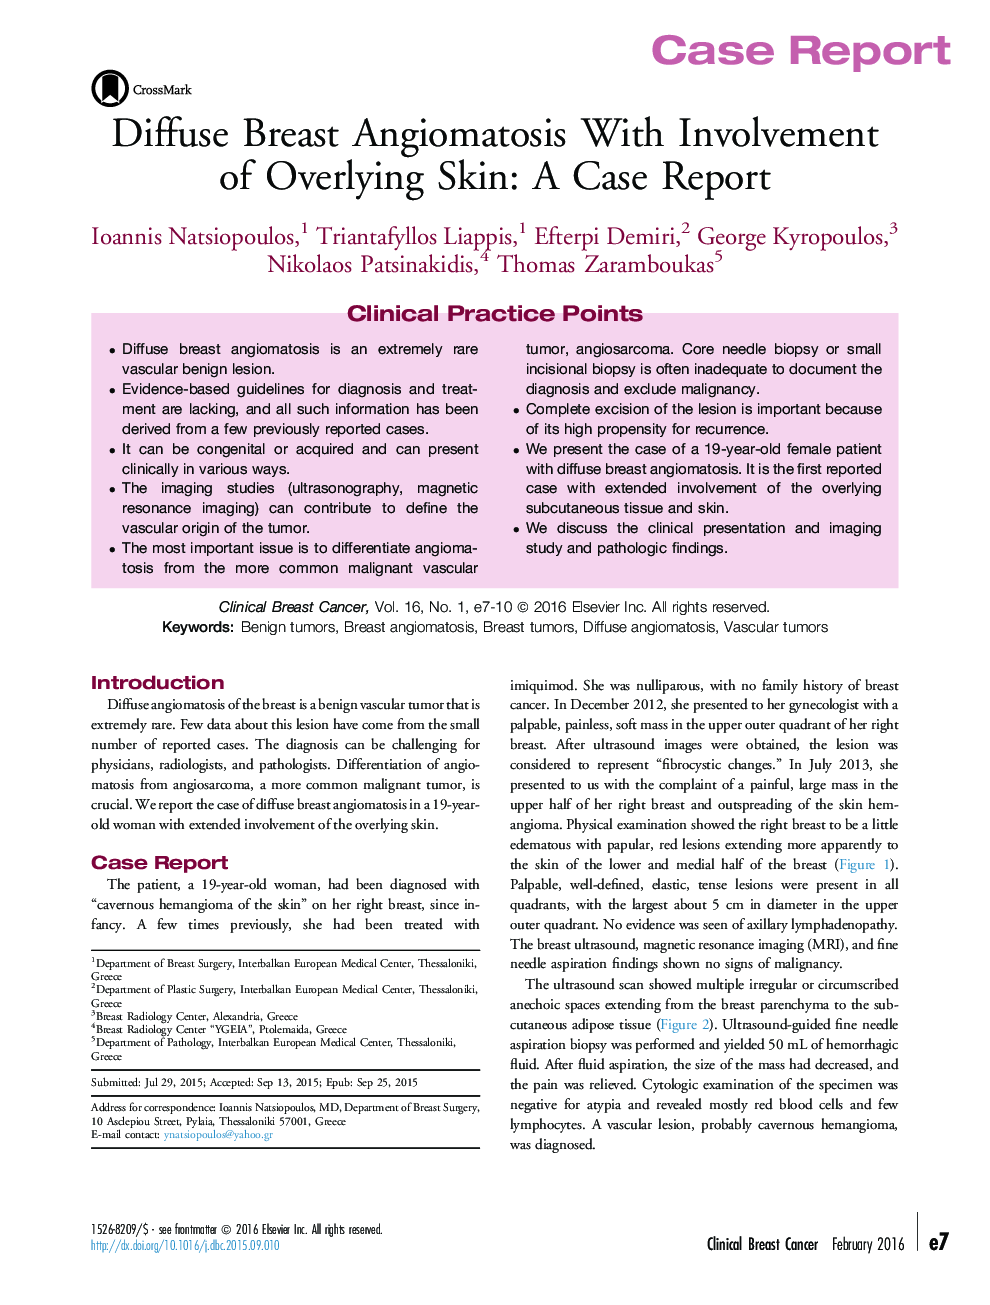 Diffuse Breast Angiomatosis With Involvement ofÂ Overlying Skin: A Case Report